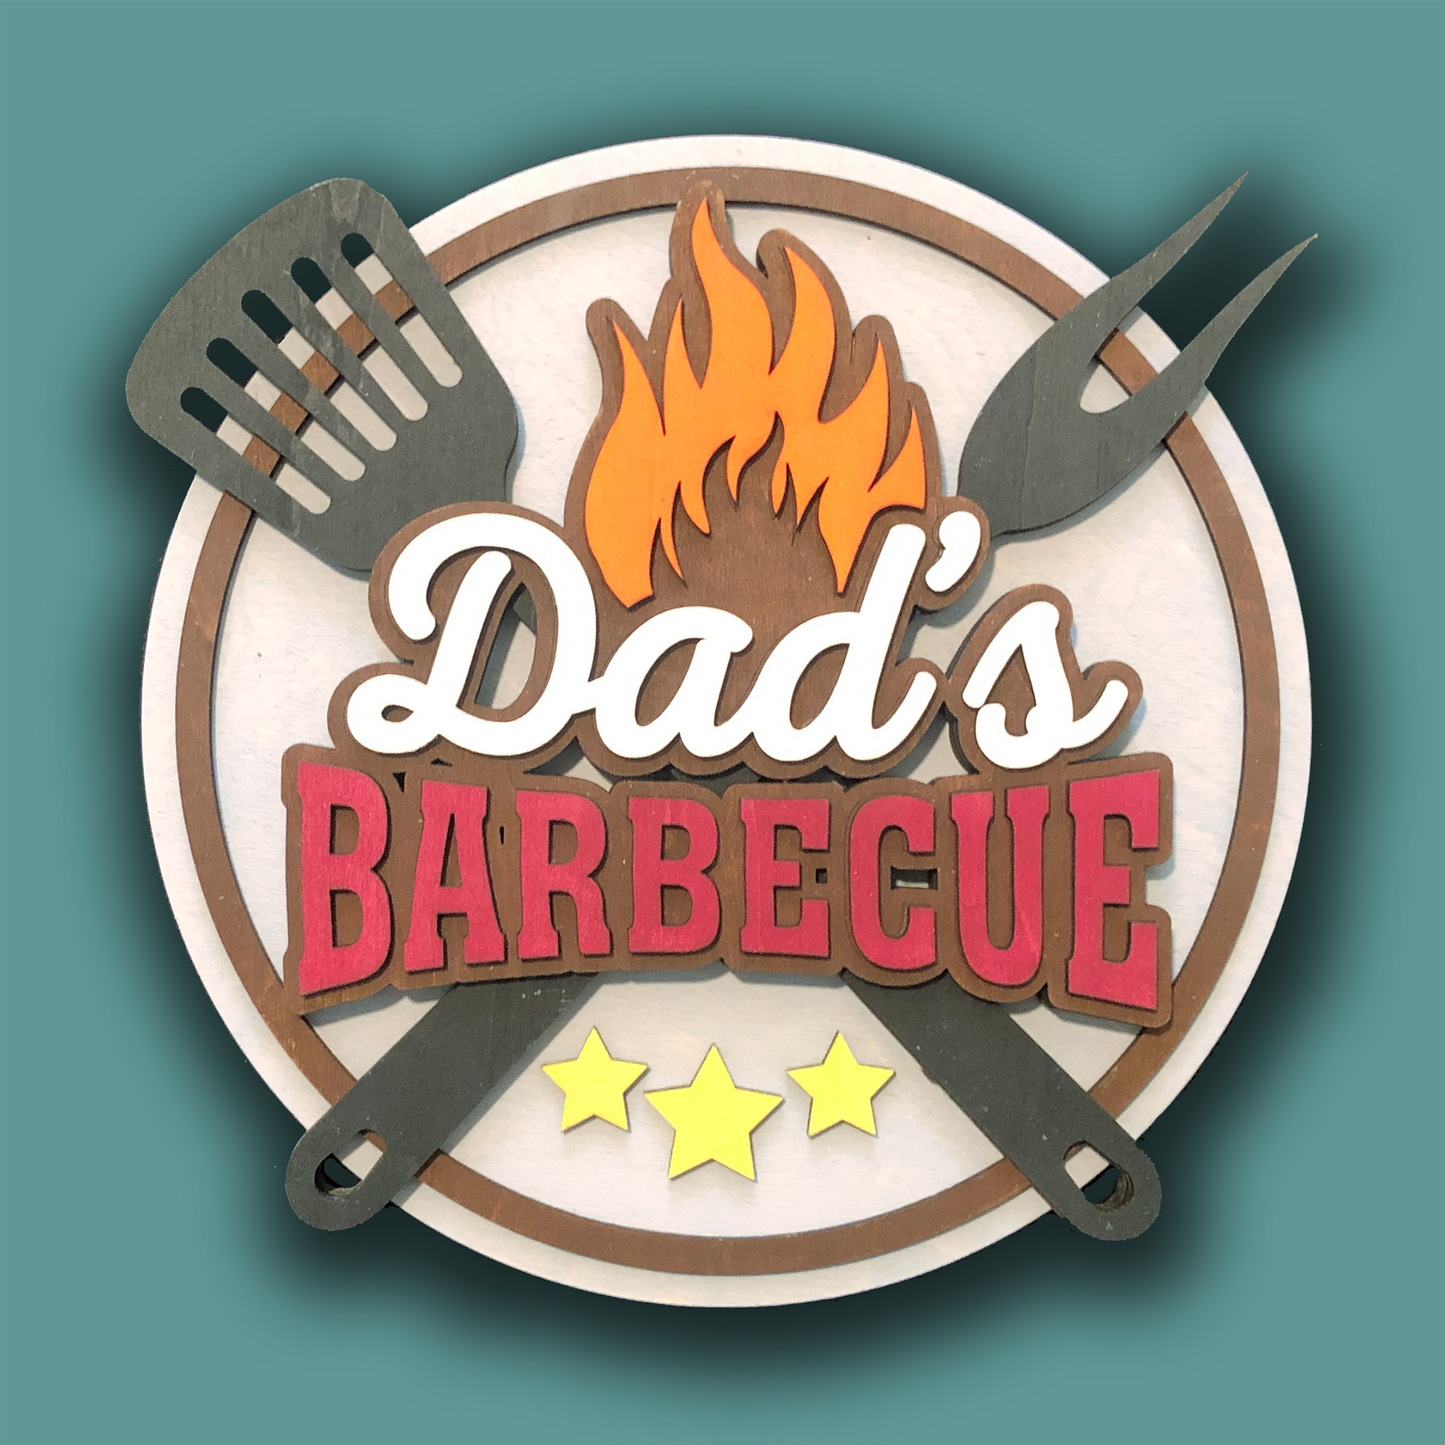 Dad's Barbecue sign with layered 3D effect